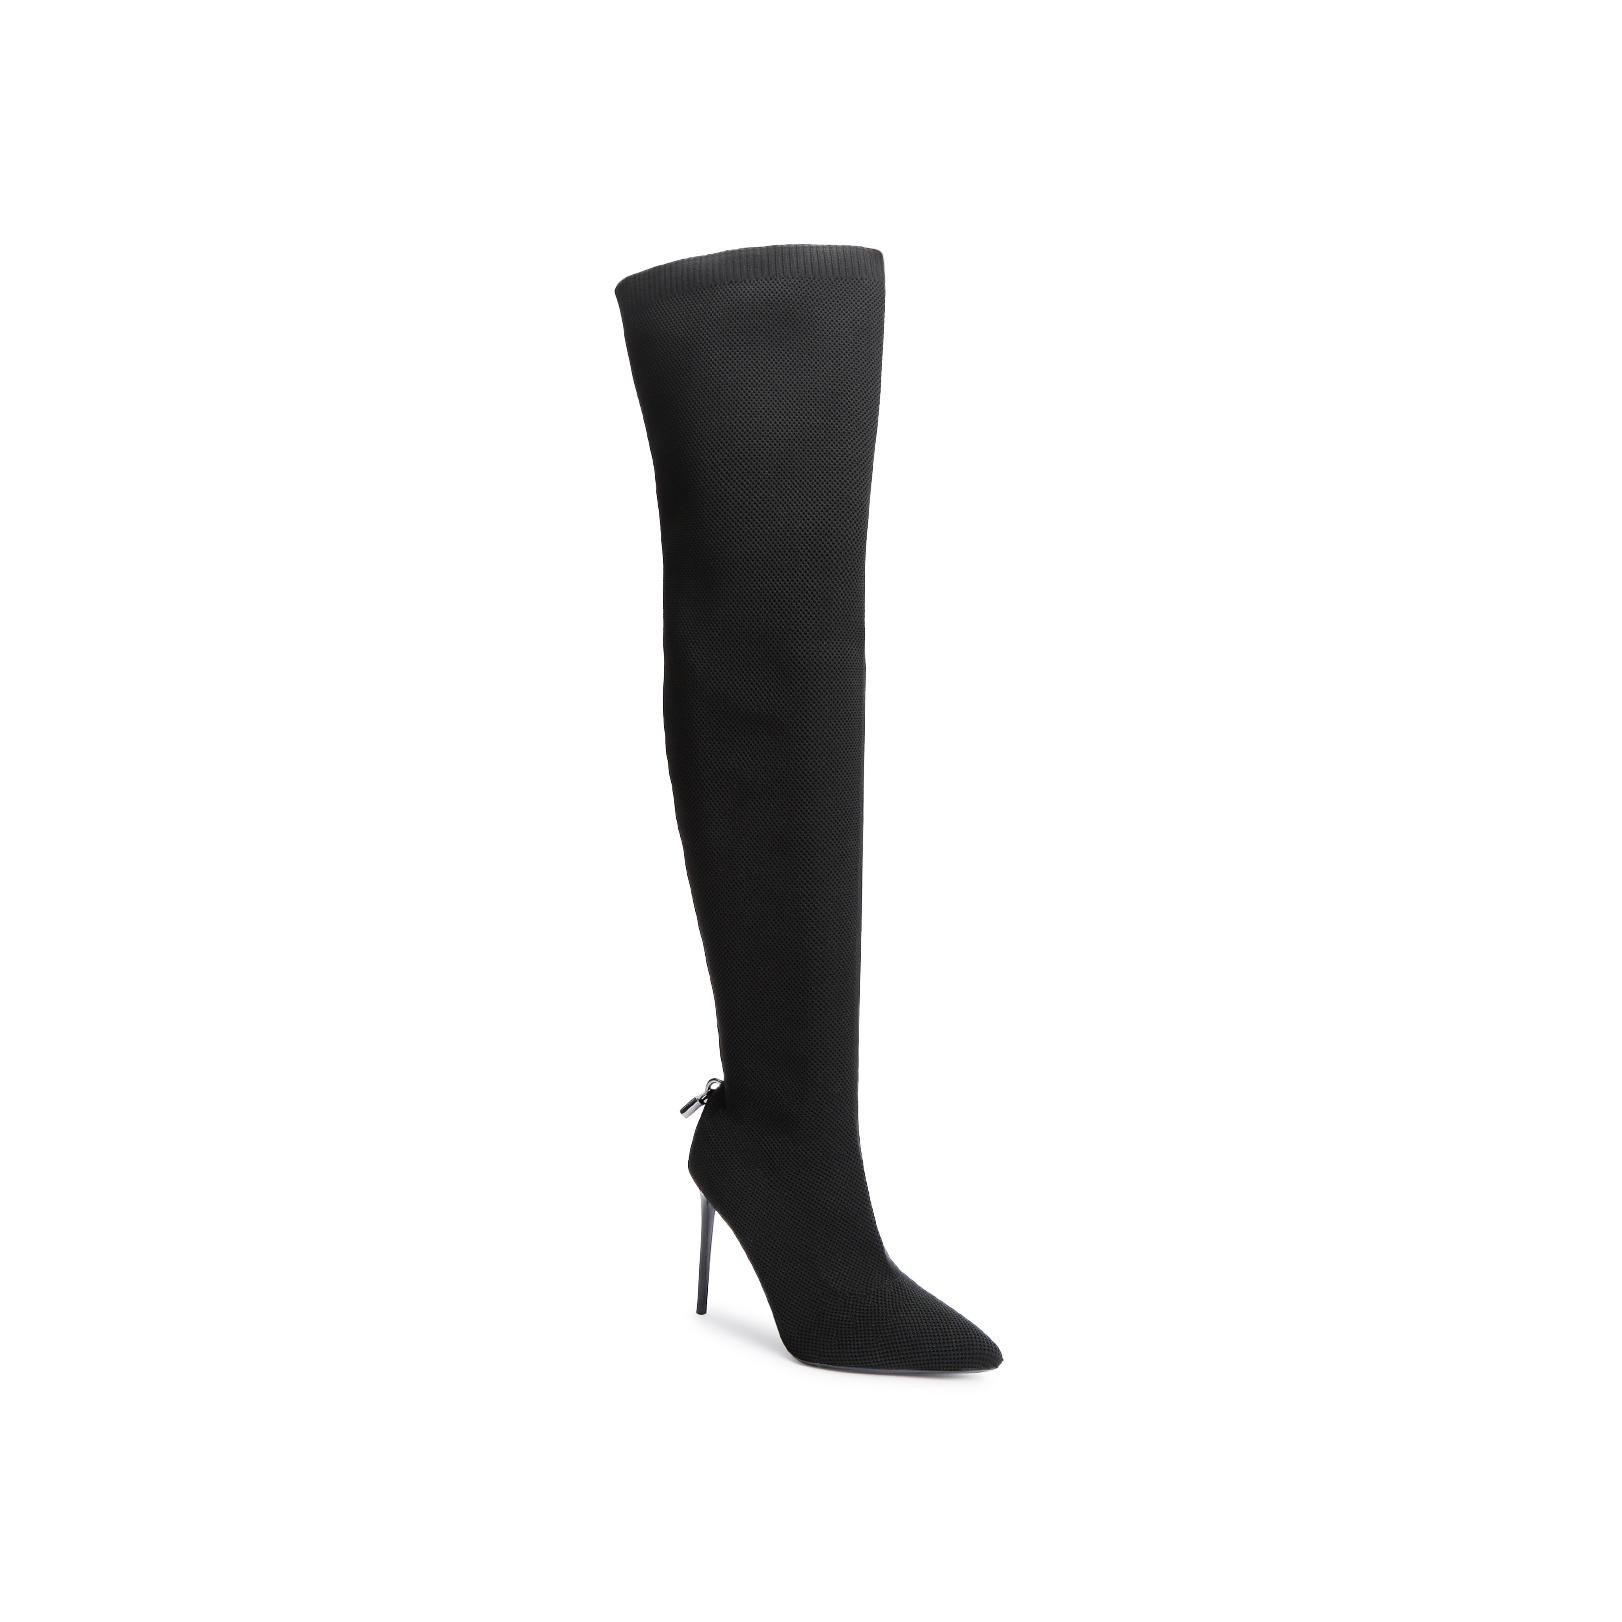 VIXEN OTK Black Knitted Over The Knee Boots by CARVELA